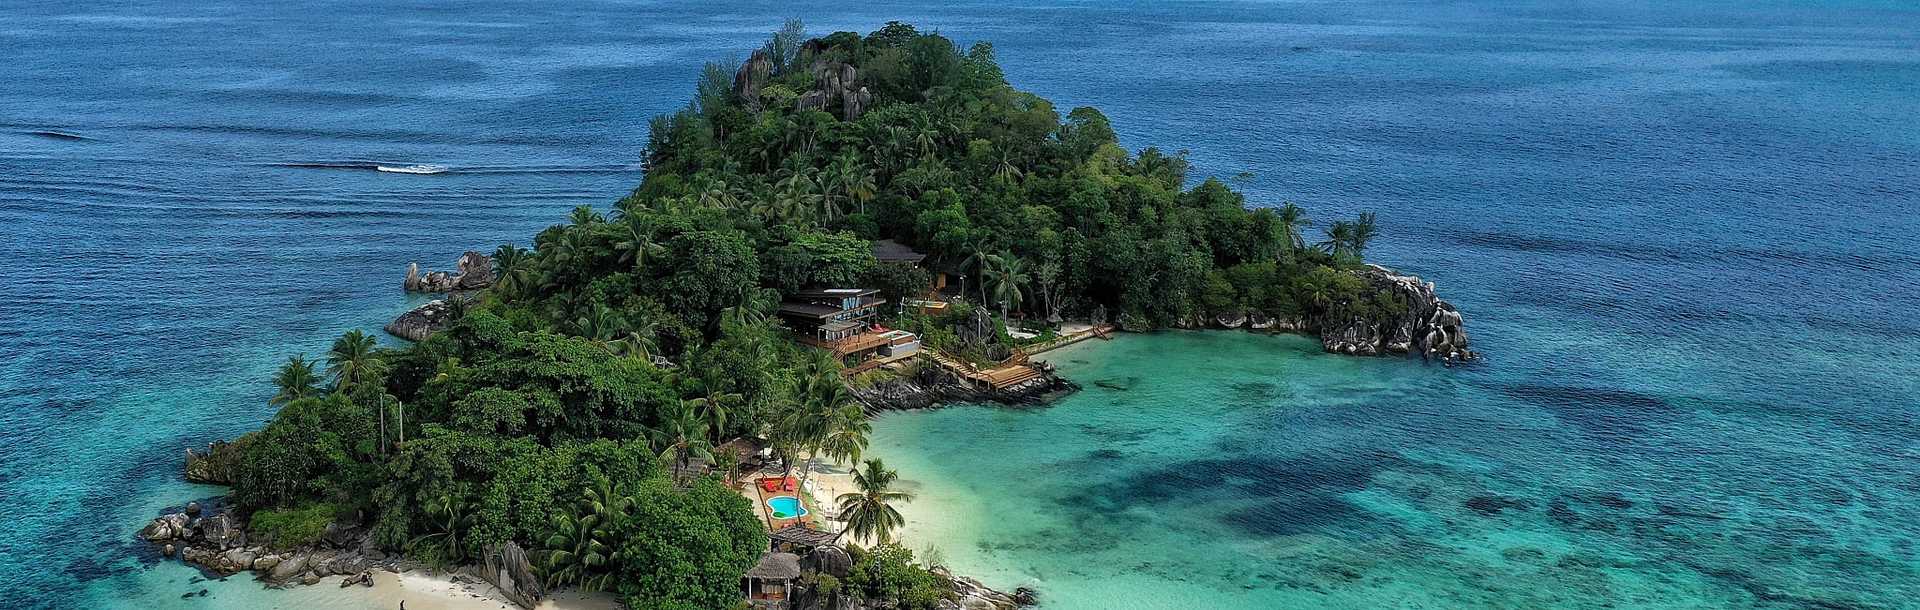 Small island in the Seychelles